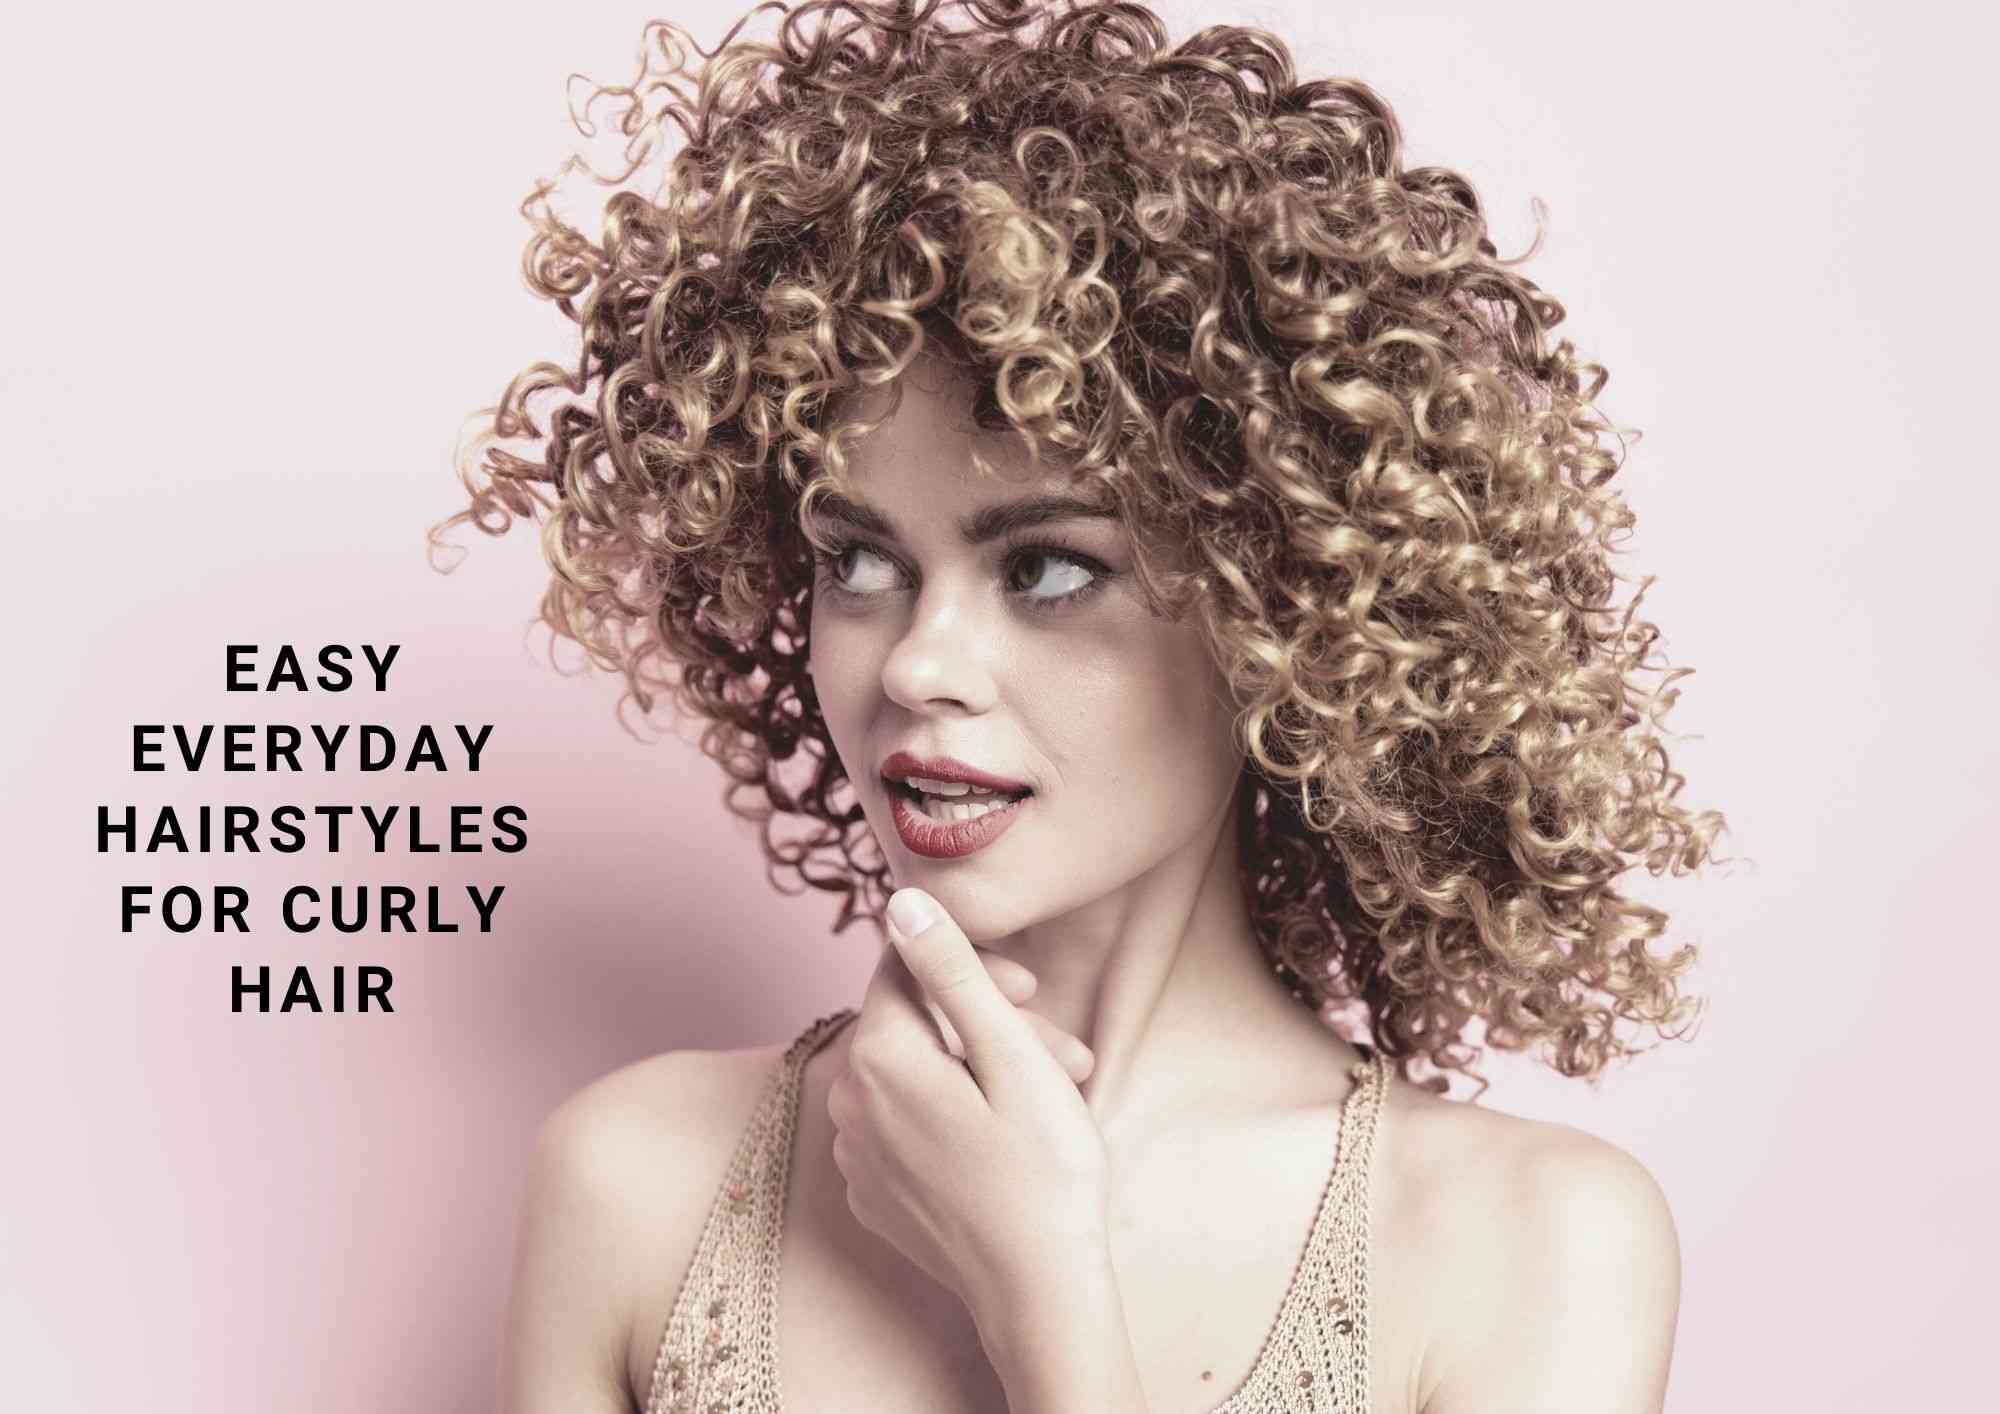 16 Easy Everyday Hairstyles For Curly Hair 2023 - Hair Everyday Review